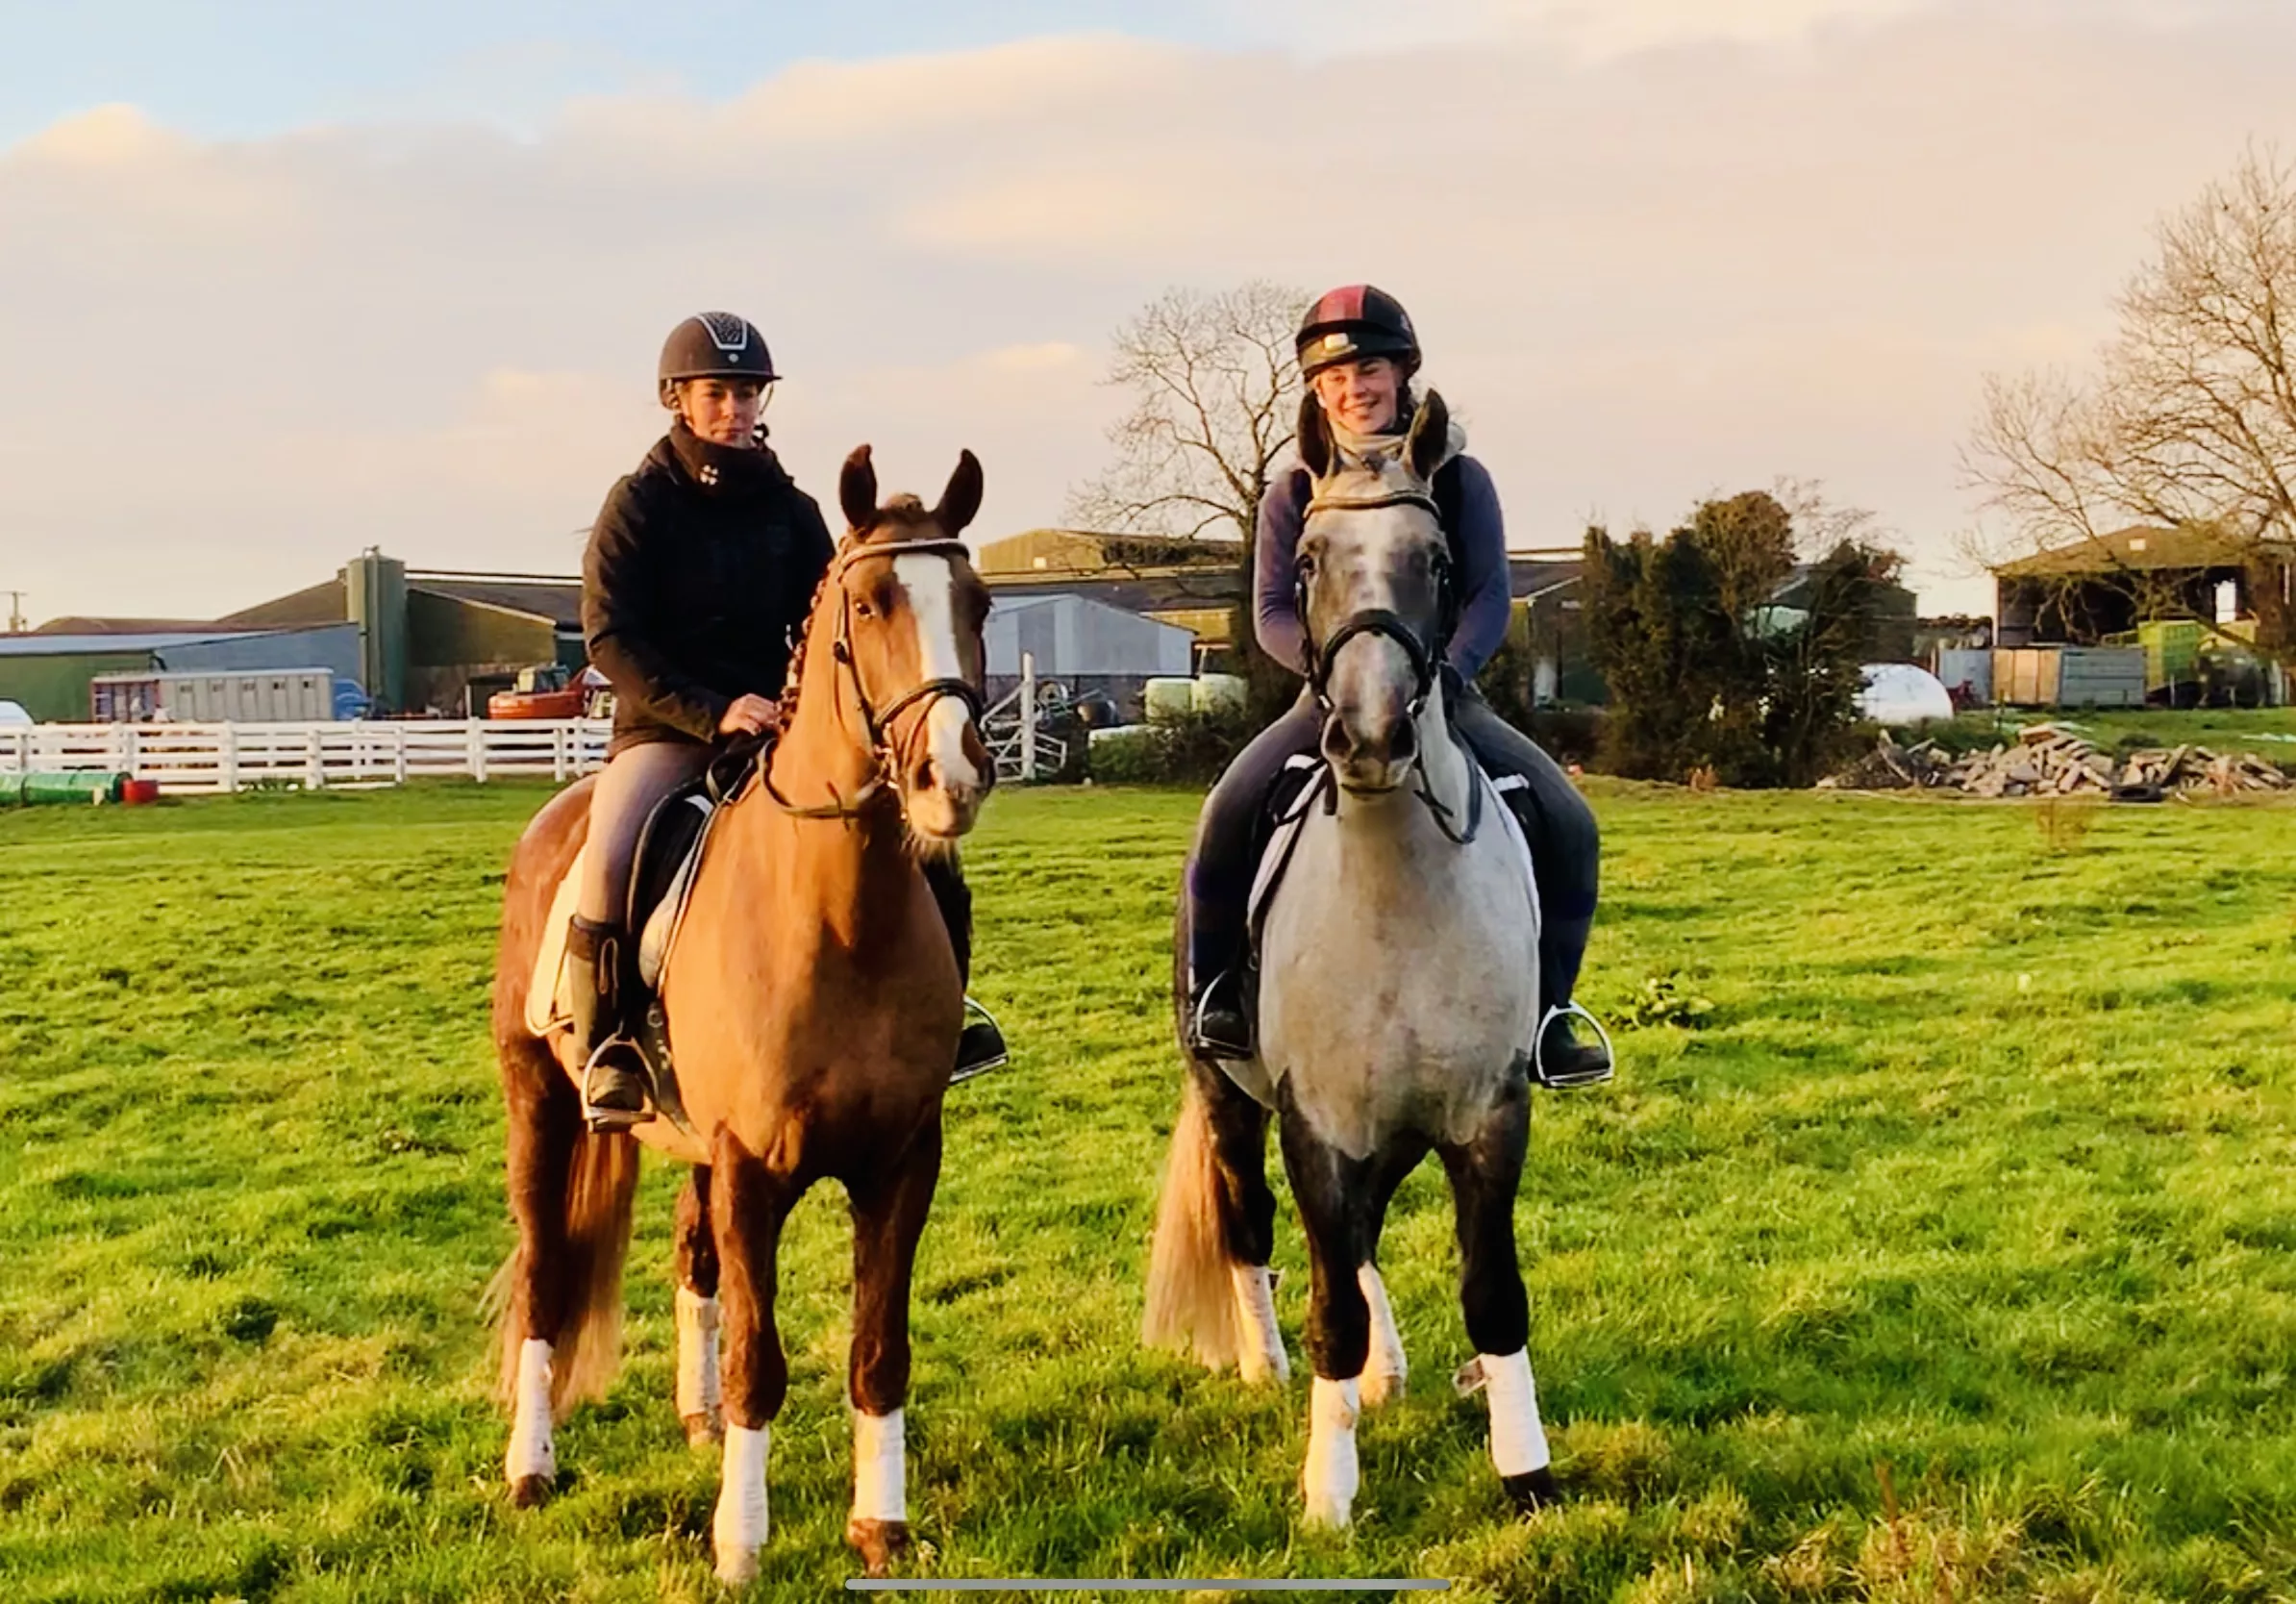 Calliaghstown Equestrian Centre in Ireland, Europe | Horseback Riding - Rated 1